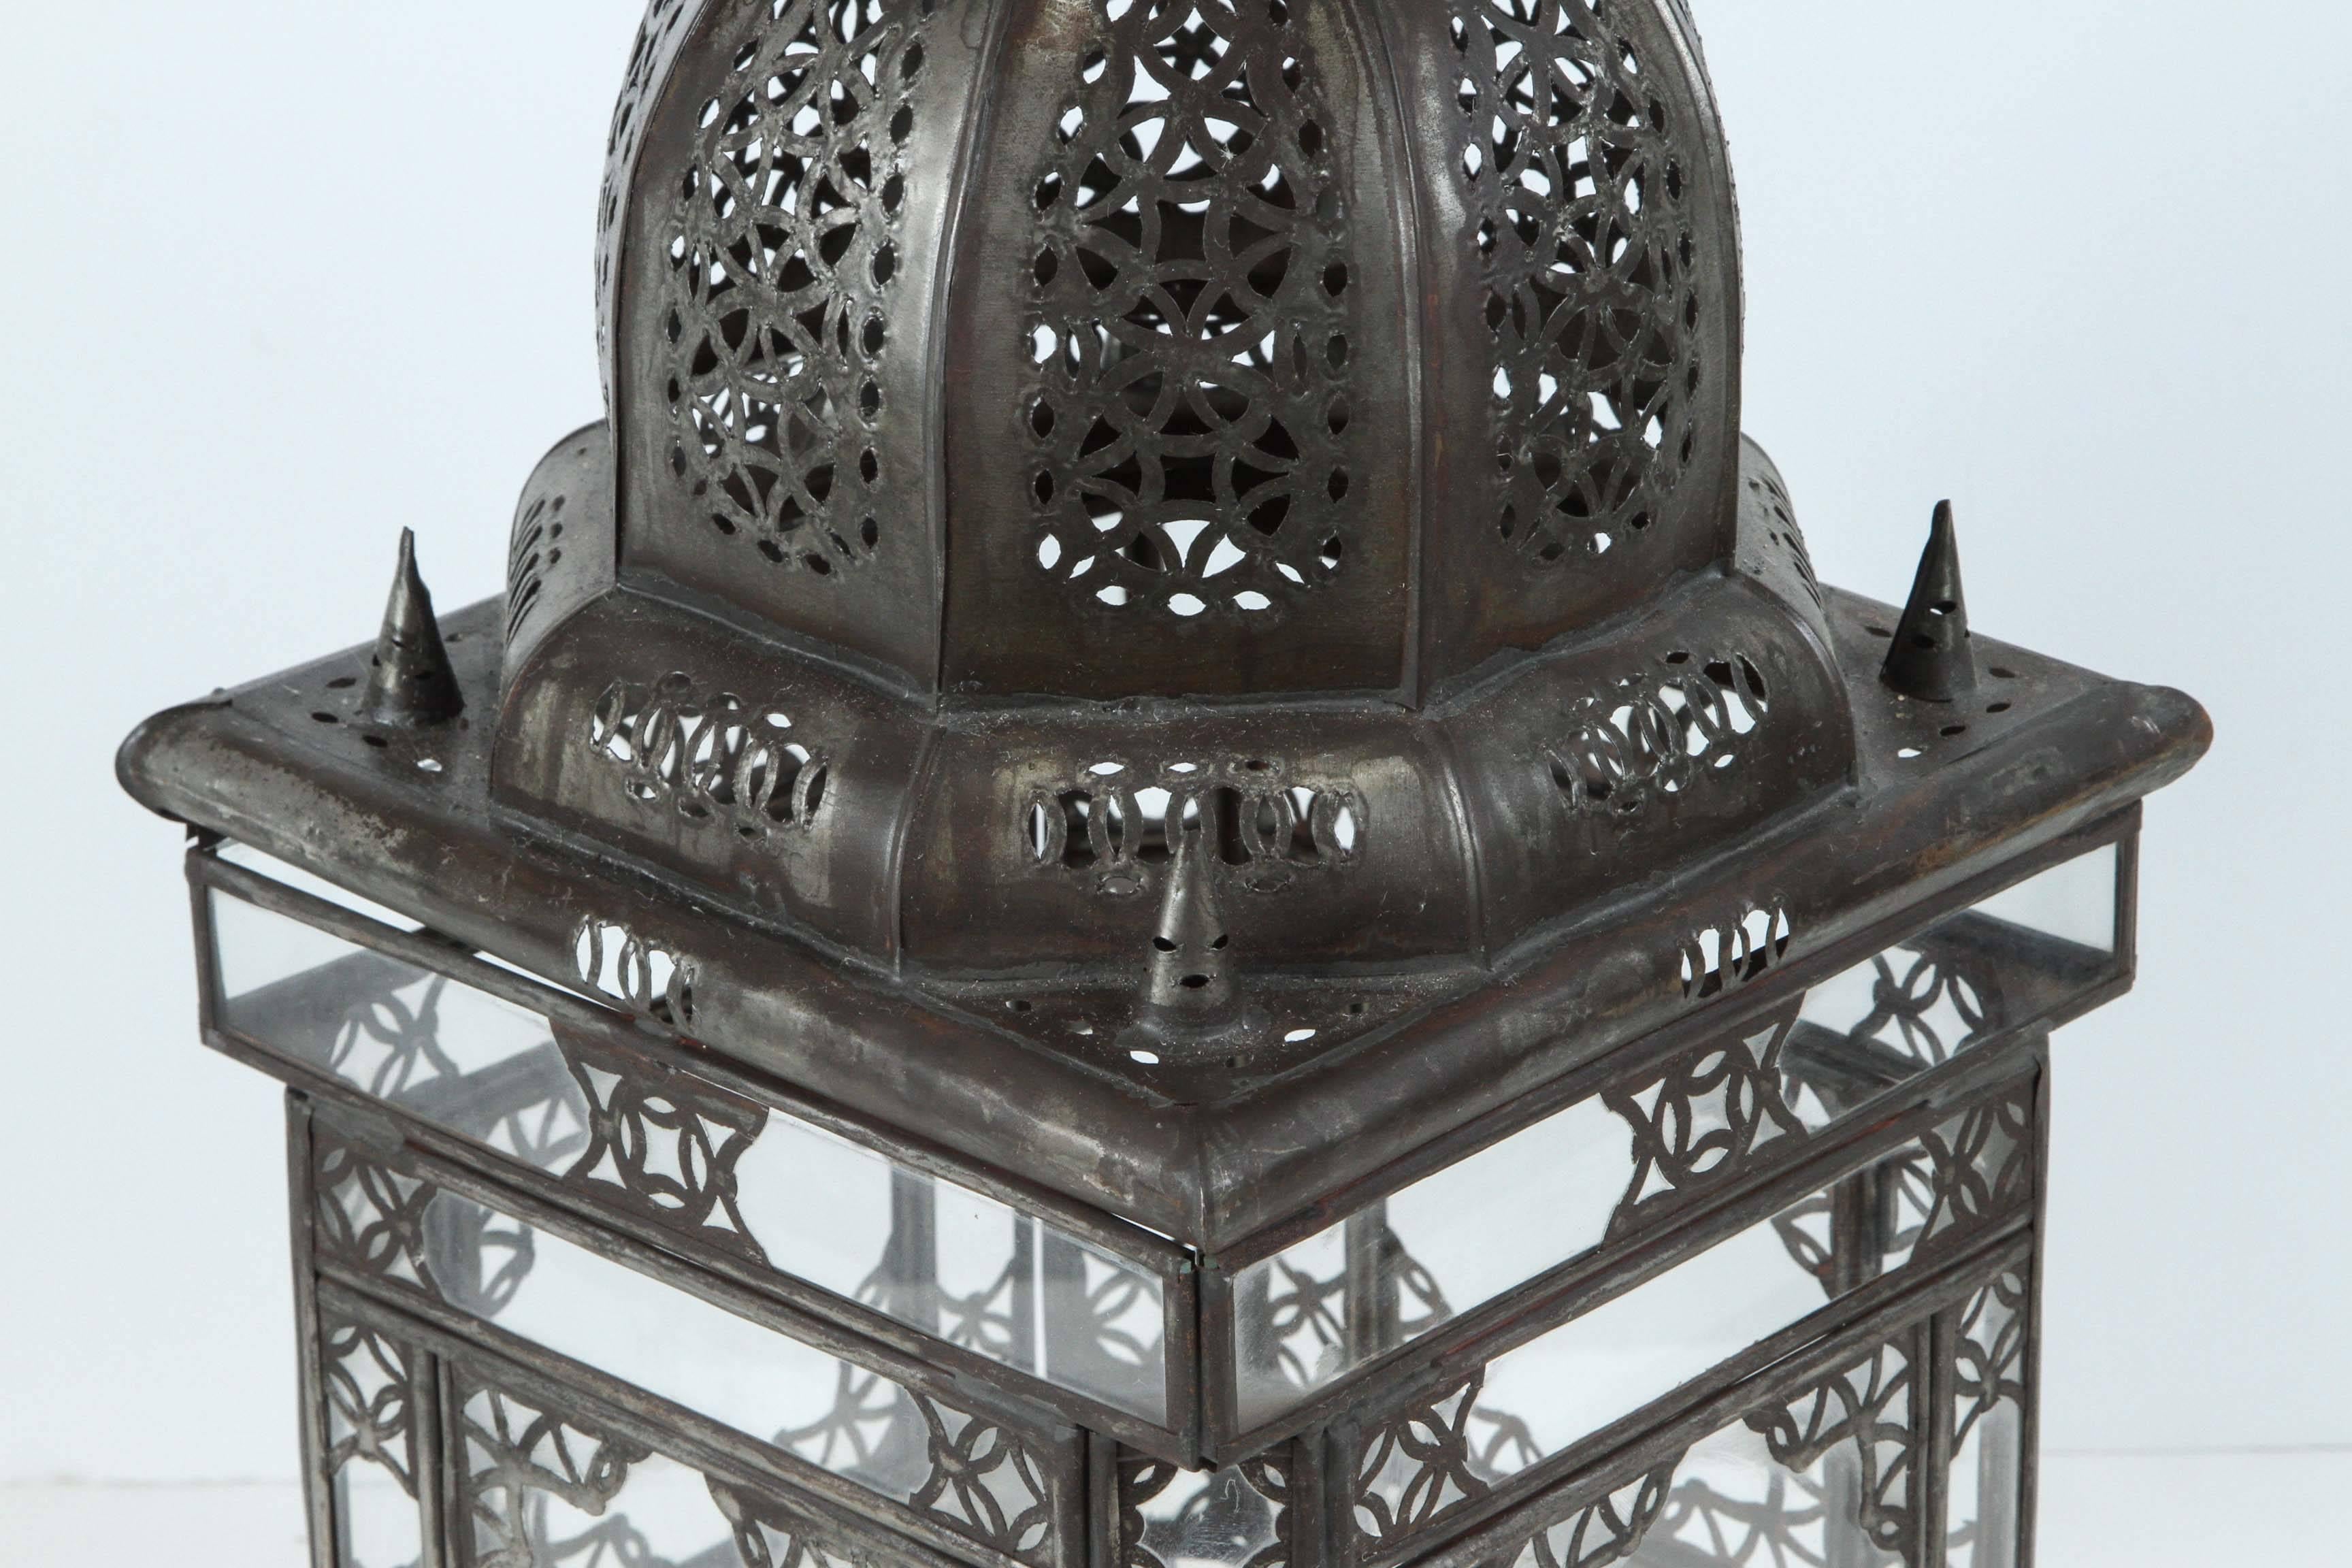 Moroccan Moorish Clear Glass Lantern with Filigree Design In Good Condition For Sale In North Hollywood, CA